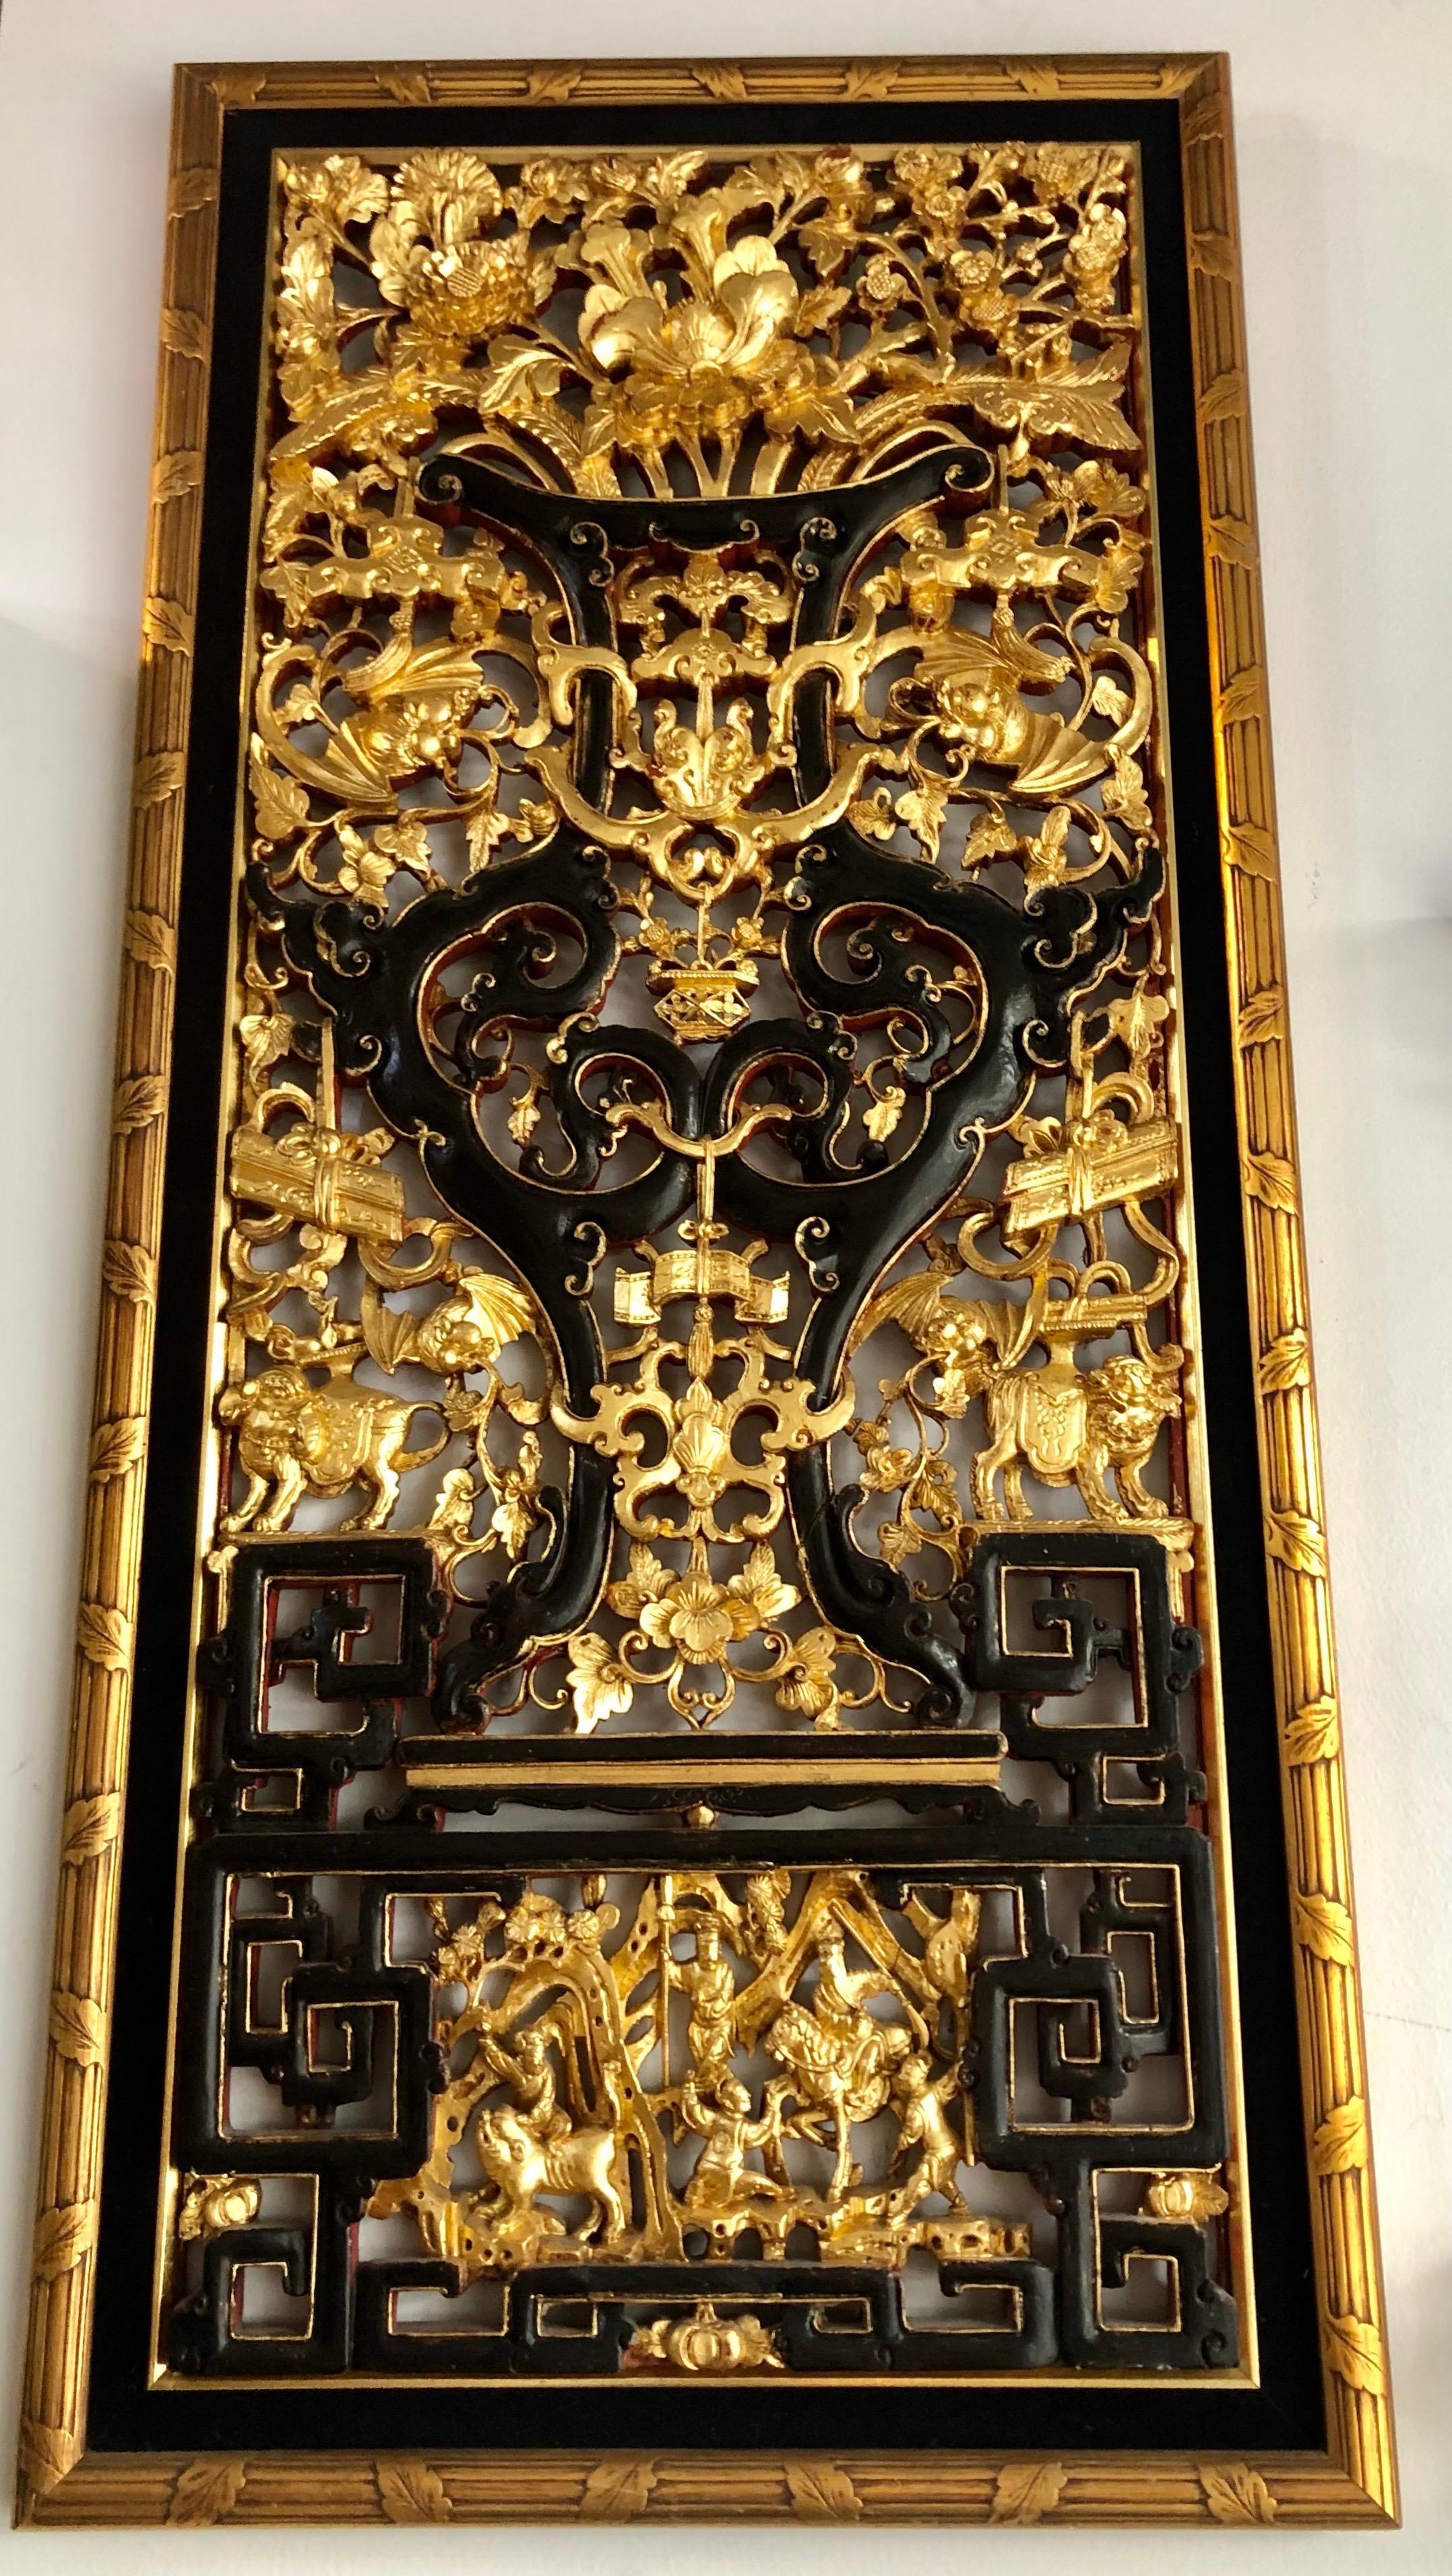 Early 20th century Chinese gilded carved wood wall panels in very good condition 
Measures: 40 inches high x 18.5 inches wide x 2 inches deep.